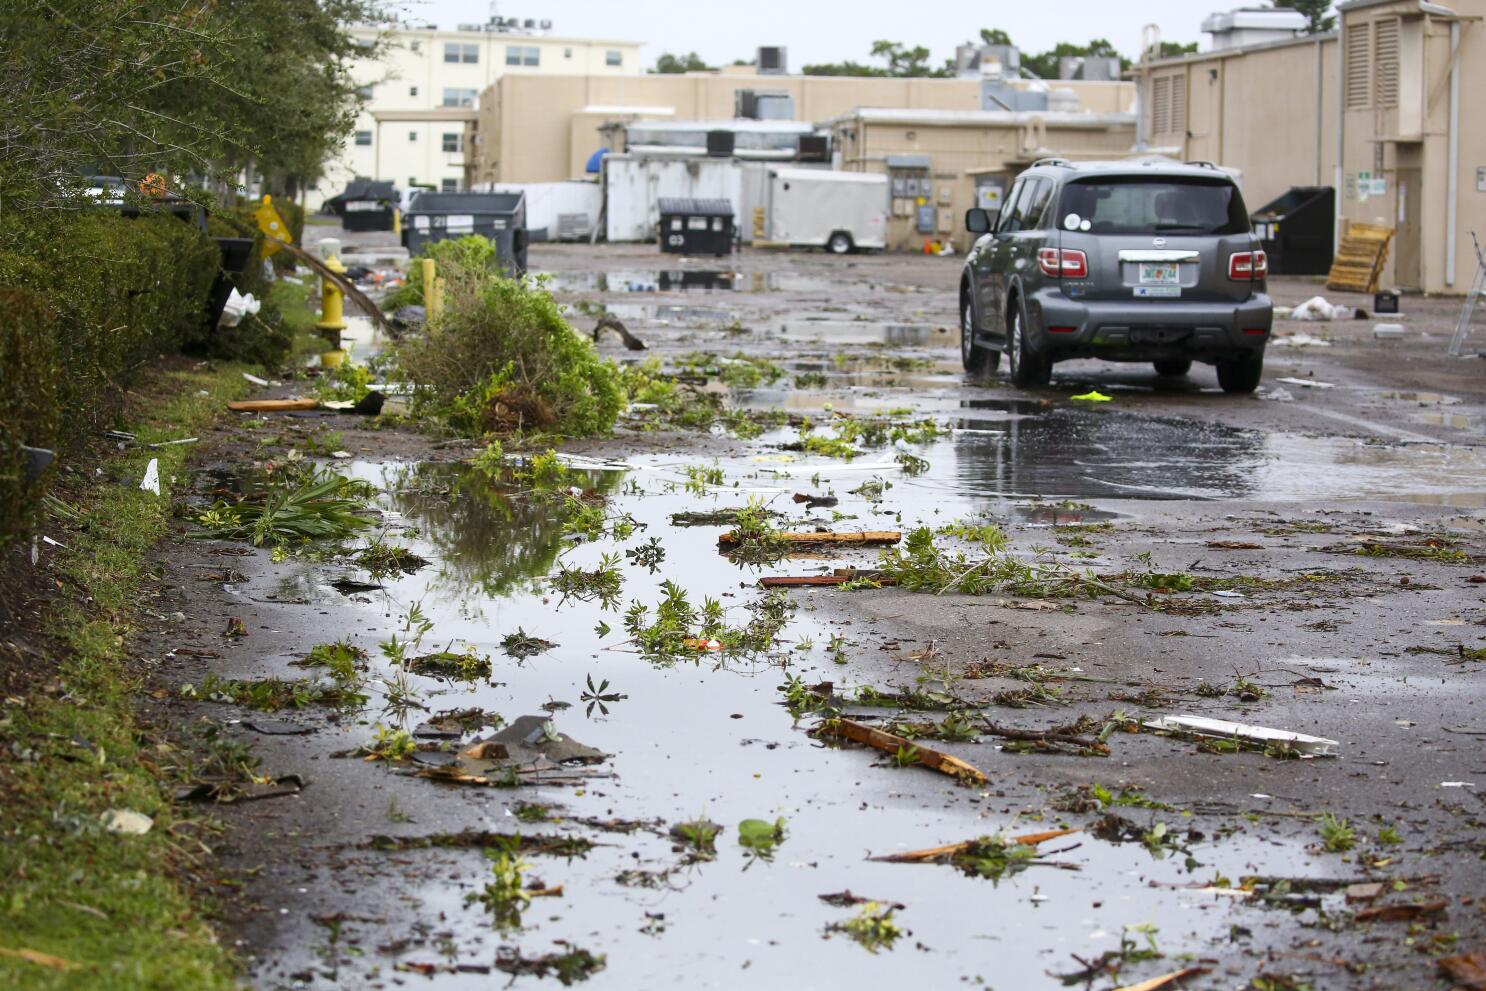 Early morning storms leave path of damage from Tampa Bay into